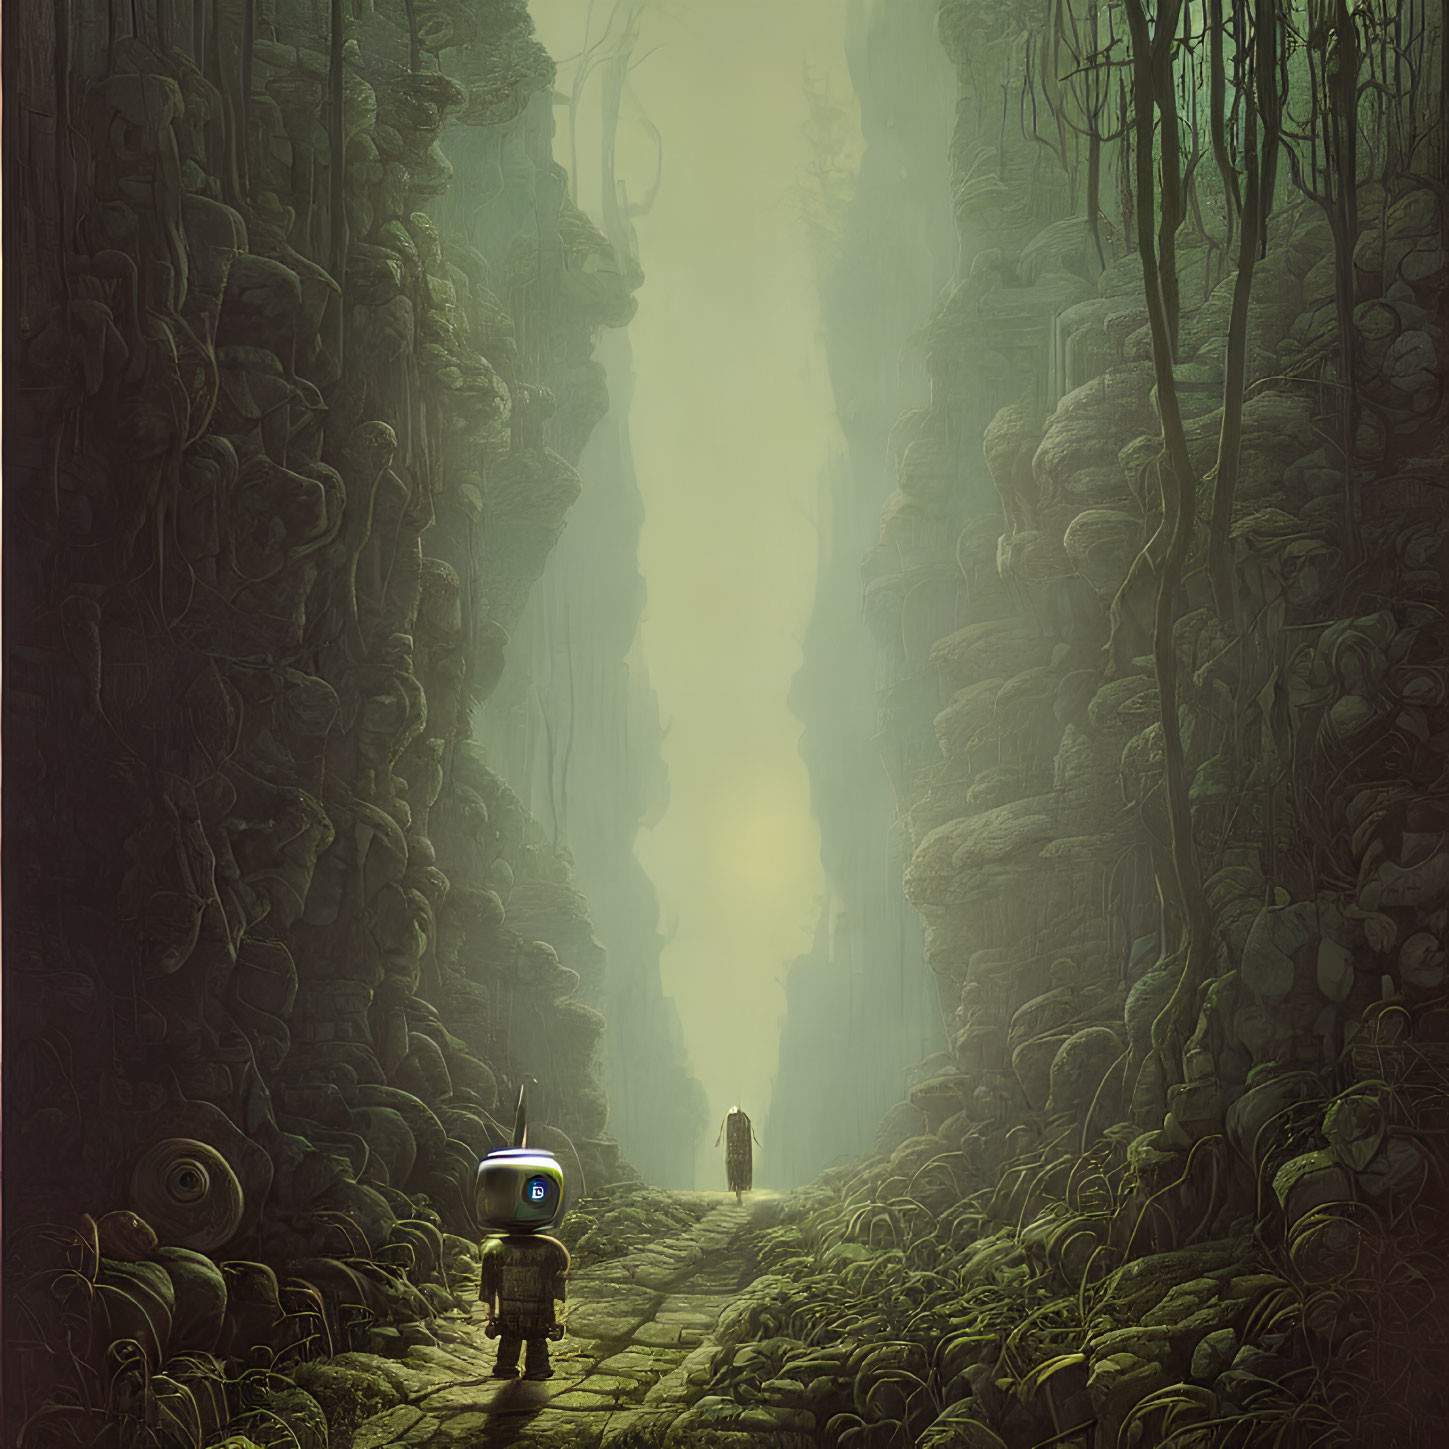 Robot and cloaked figure in mossy canyon with towering walls and mysterious light.